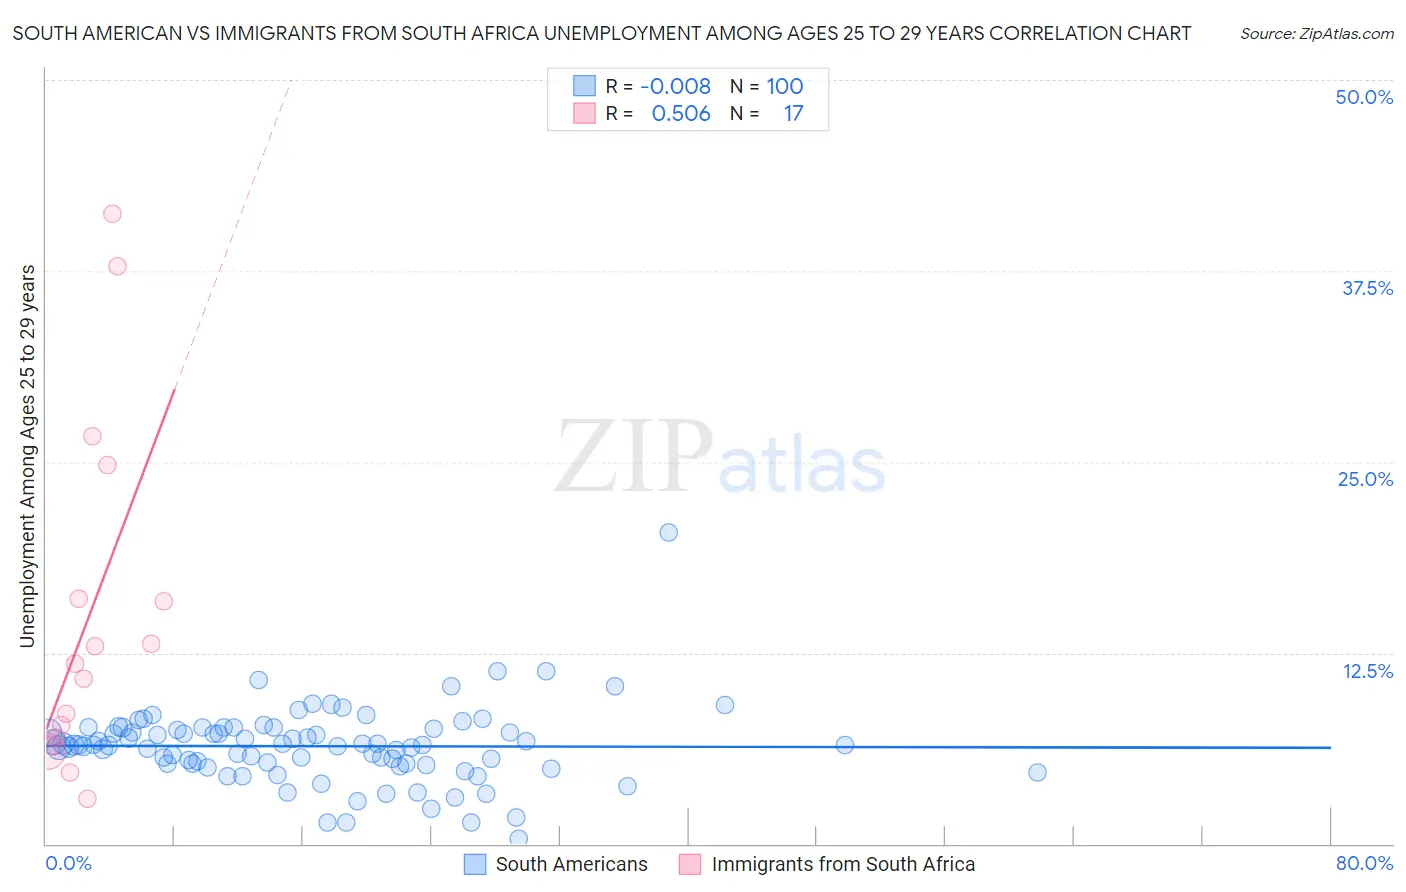 South American vs Immigrants from South Africa Unemployment Among Ages 25 to 29 years